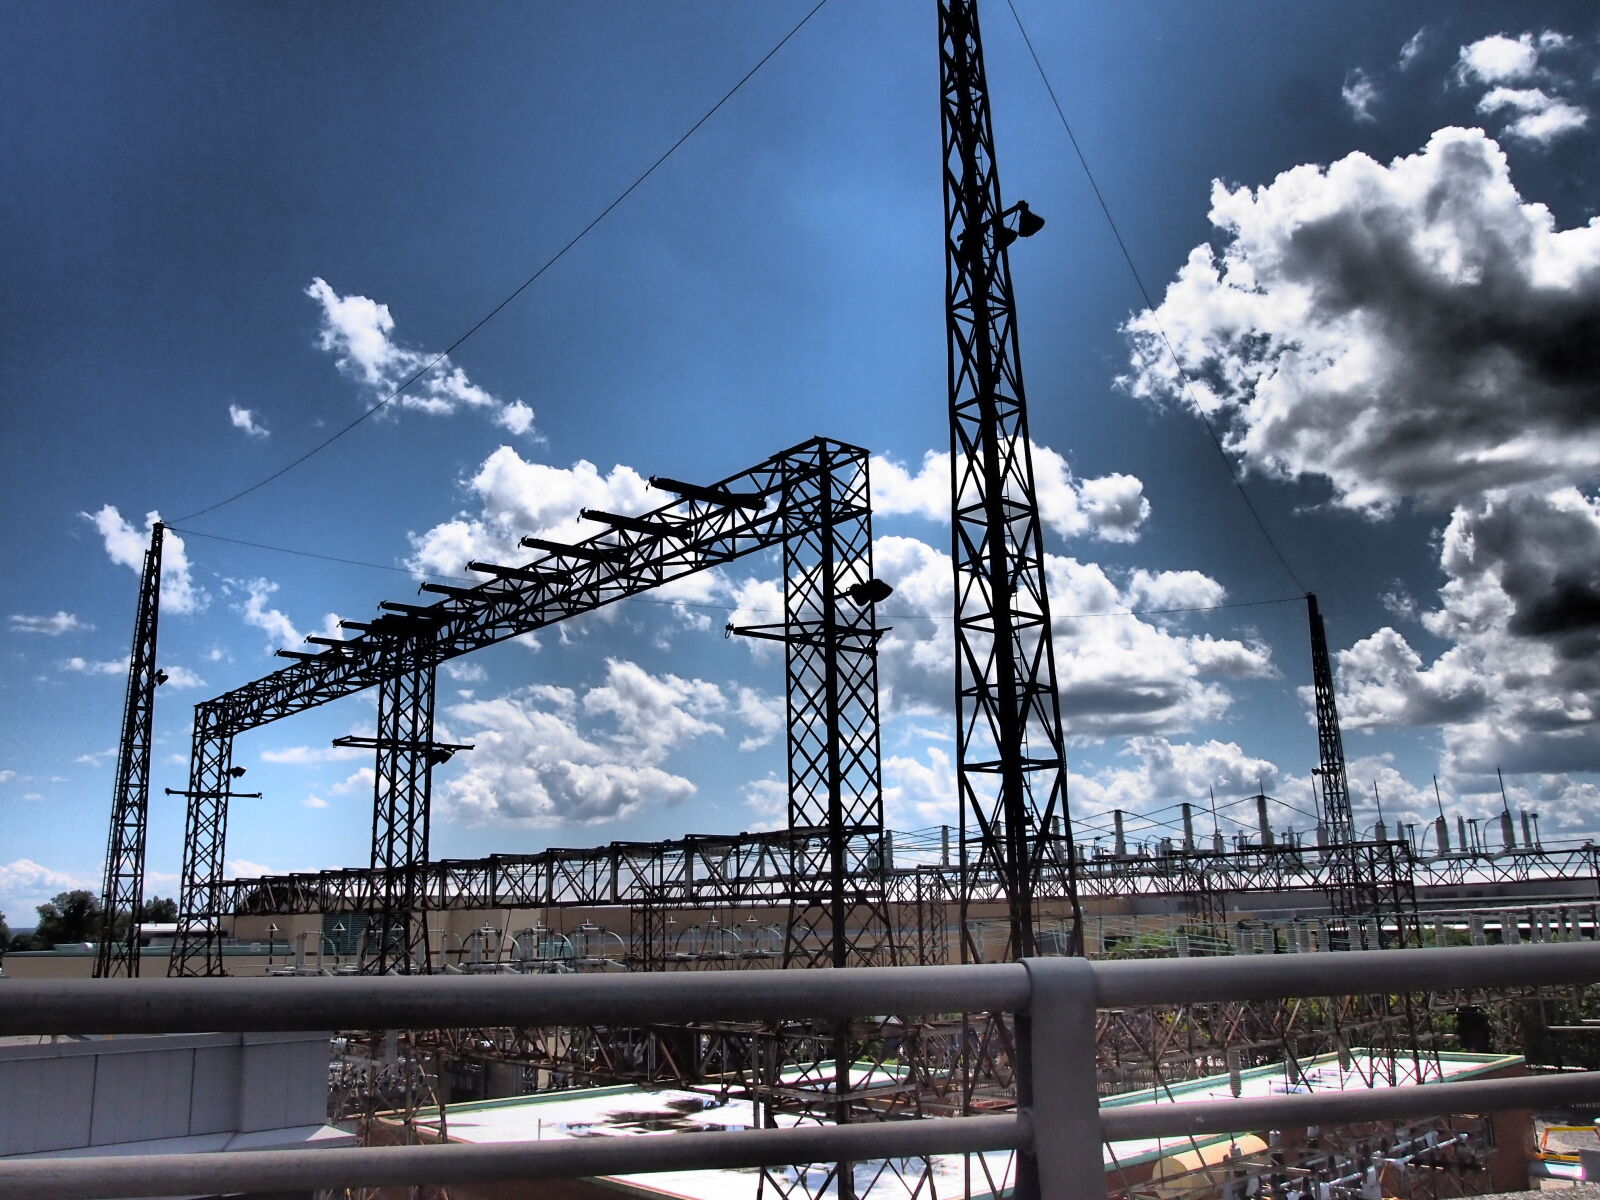 Olympus PEN E-PM1 sample photo. Clouds, electricity, industrial, sky photography